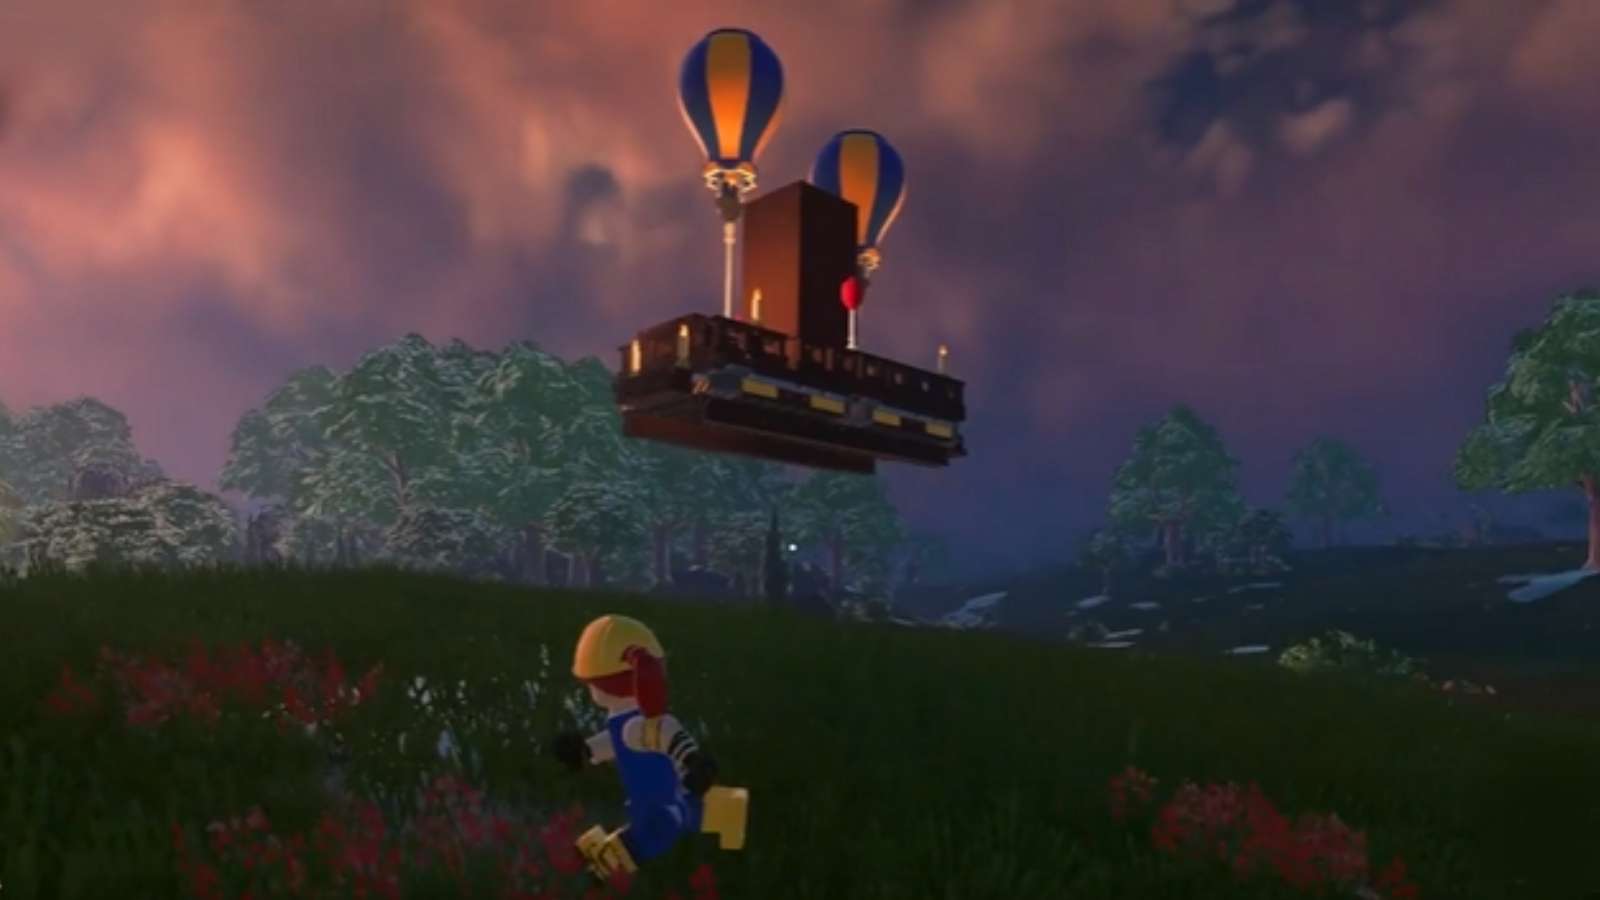 A LEGO Fortnite airship was built by a player in the game.